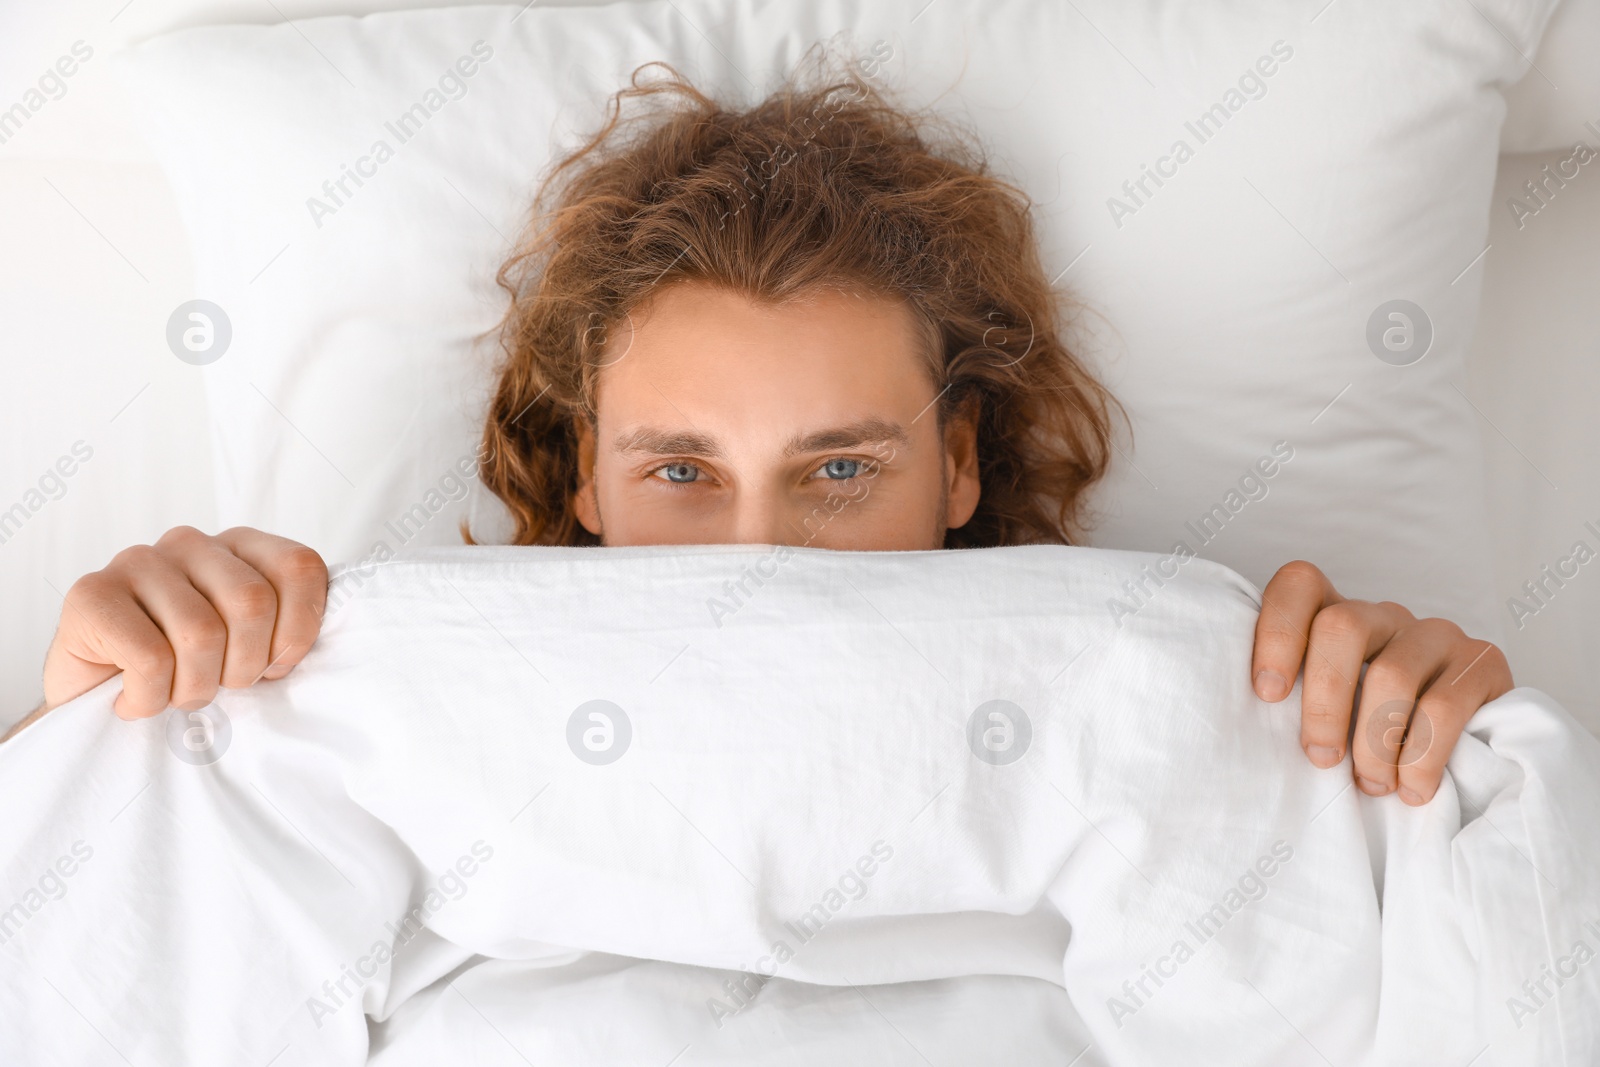 Photo of Young man covering his face with blanket while lying on pillow, top view. Bedtime